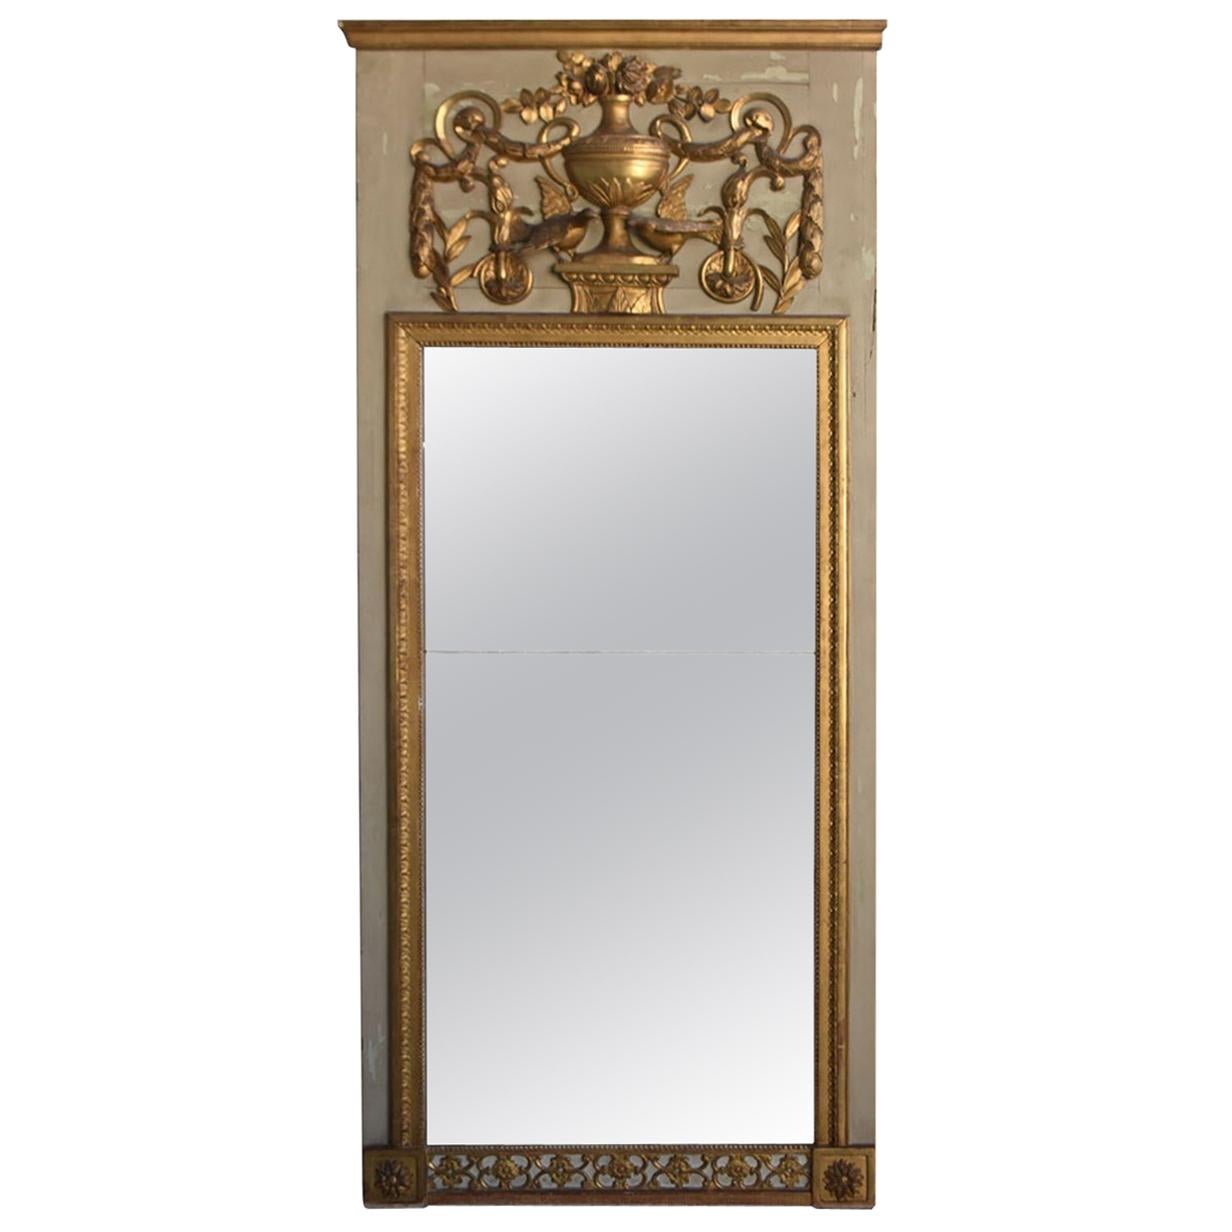 Late 18th Century Lacquered Wood and Gilded Trumeau Mirror